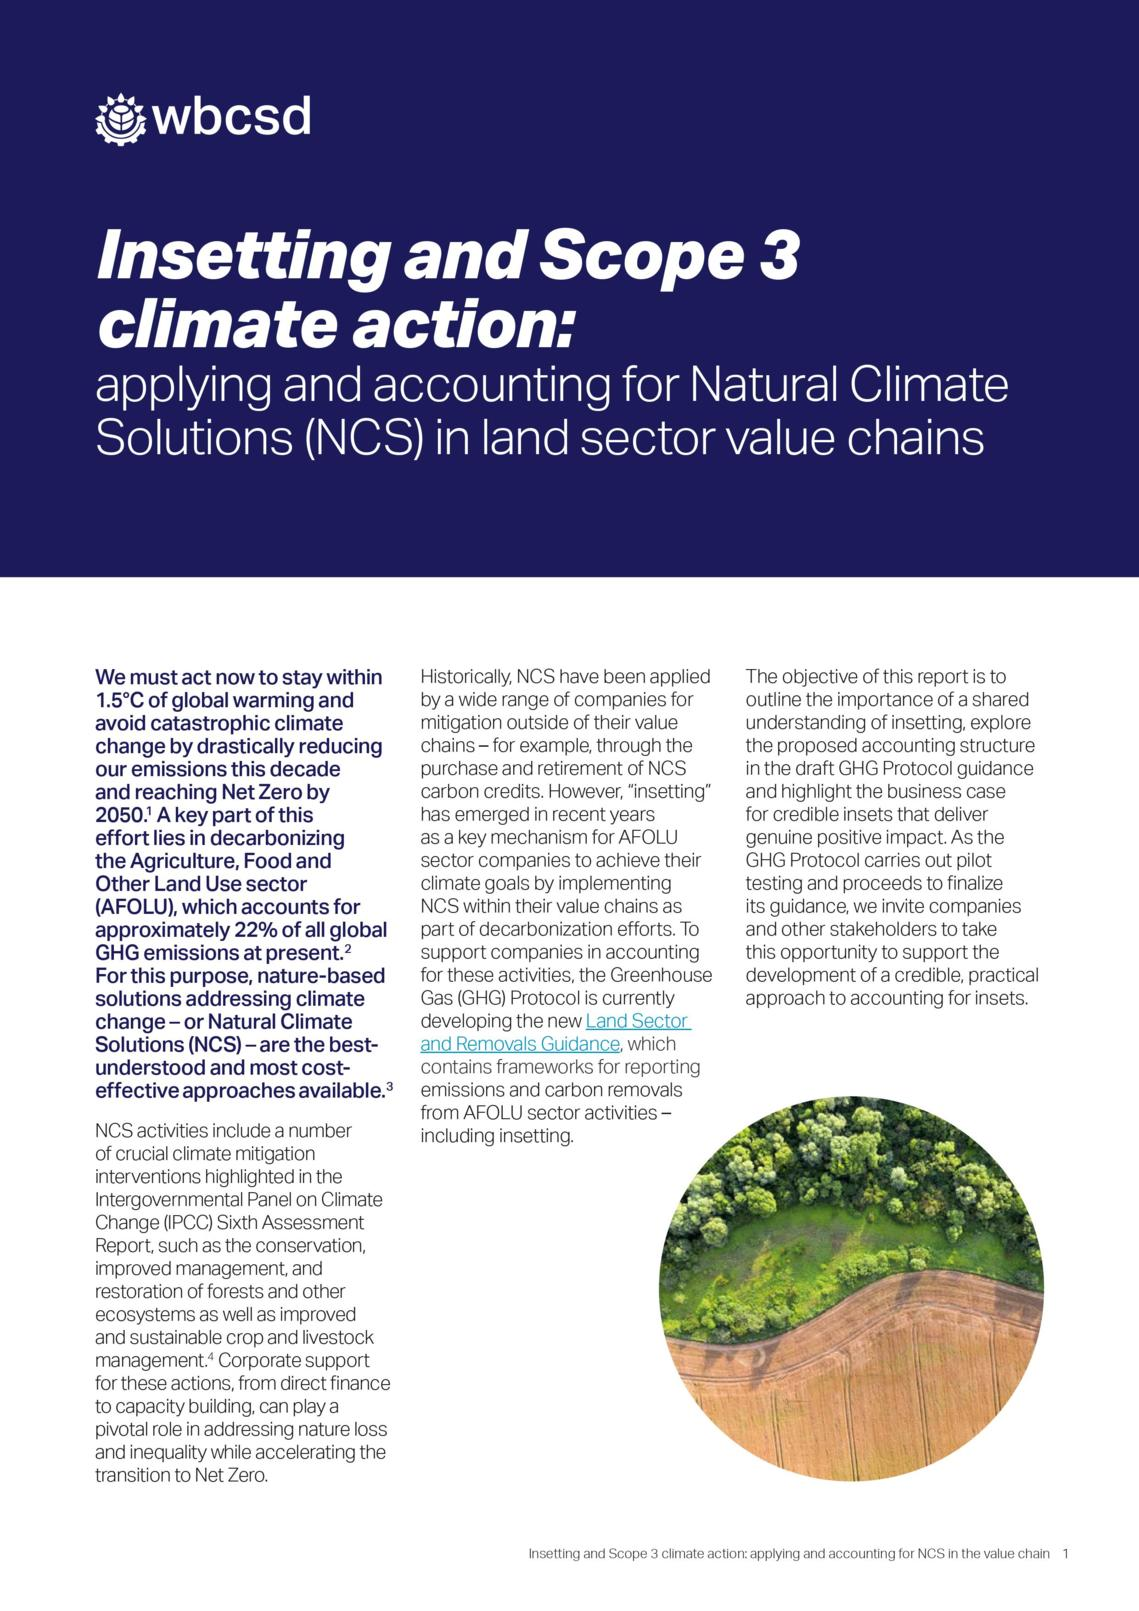 Insetting and Scope 3 climate action: applying and accounting for Natural Climate Solutions (NCS) in land sector value chains cover